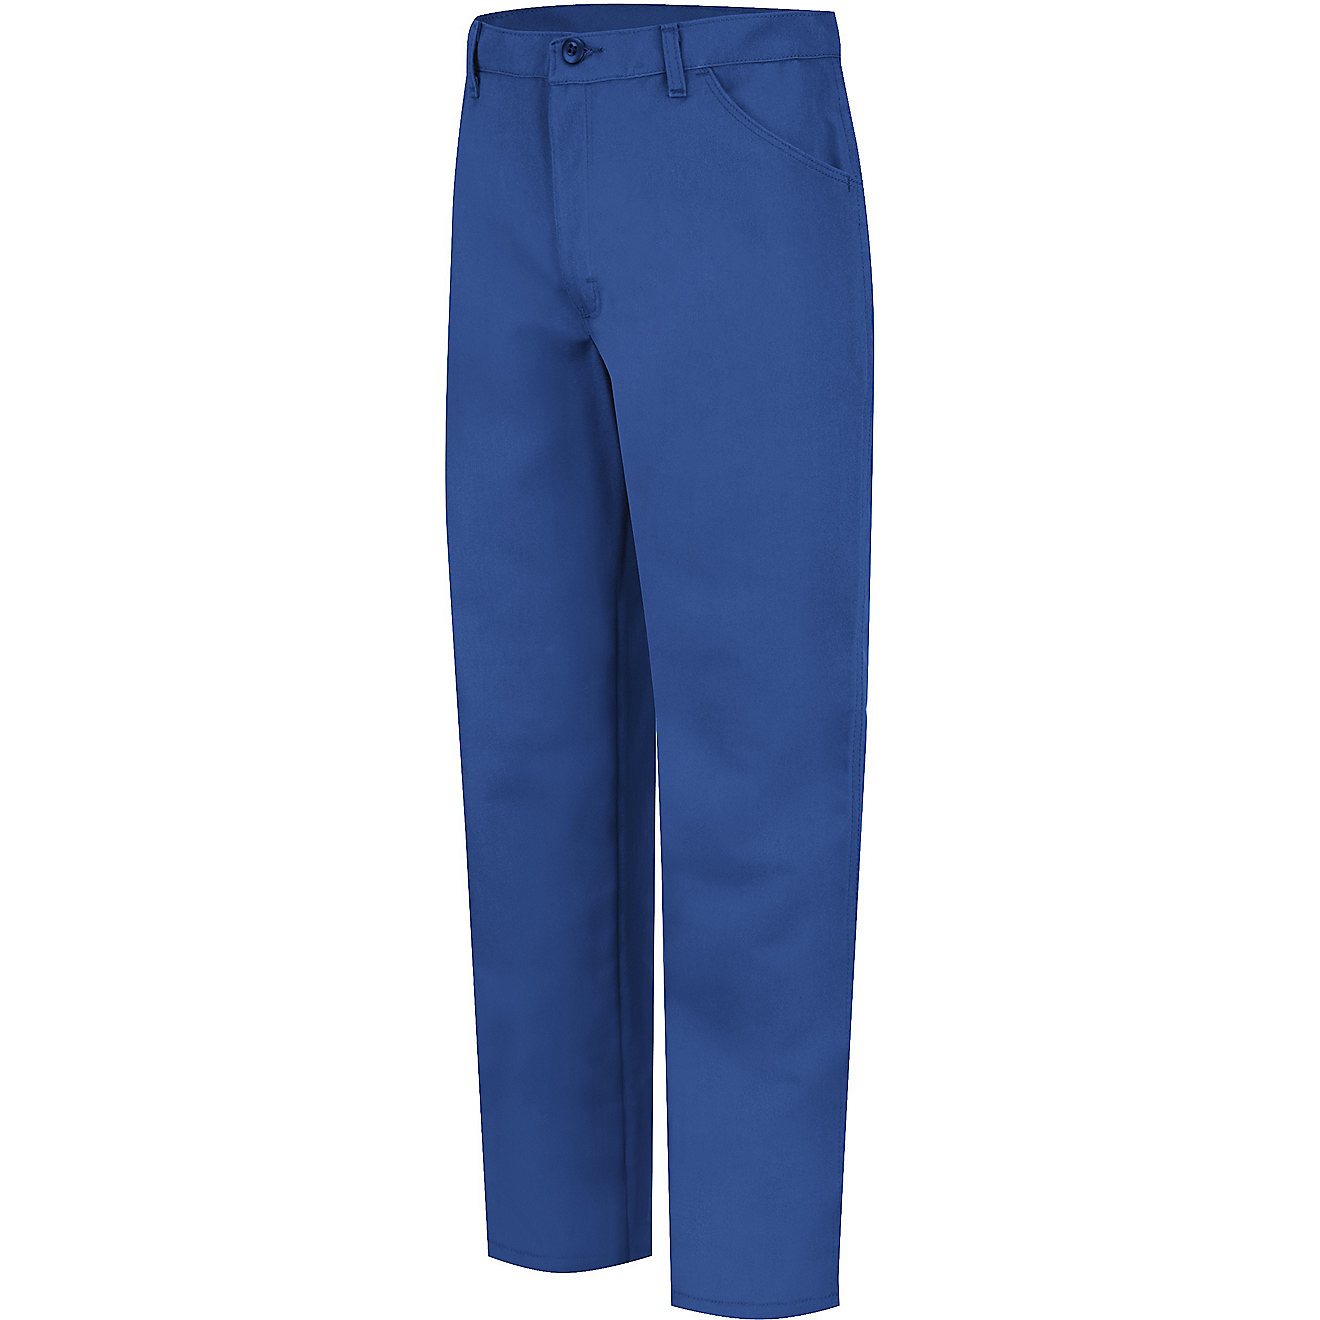 Bulwark Men's Jean-Style Pant | Free Shipping at Academy